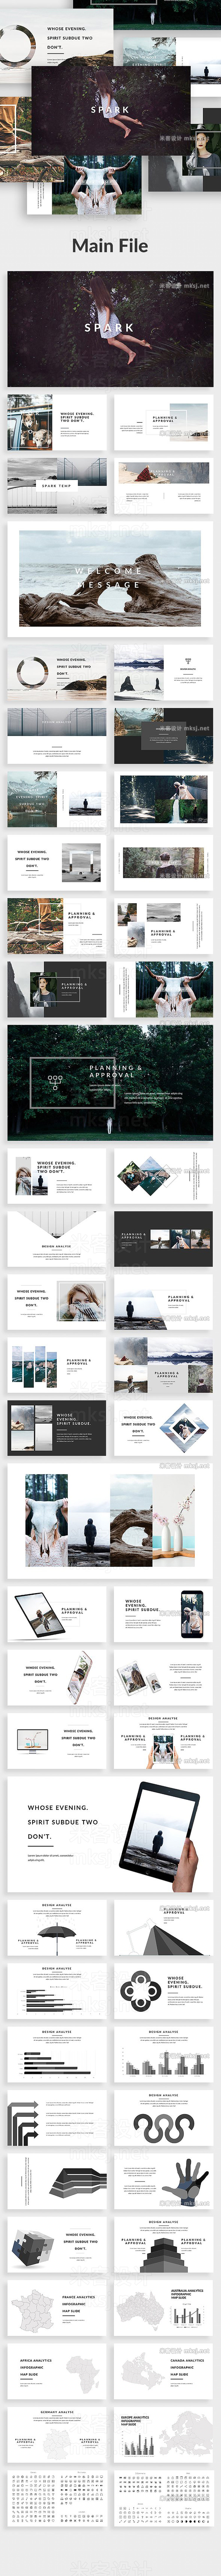 PPT模板 Spark 01 Powerpoint Template